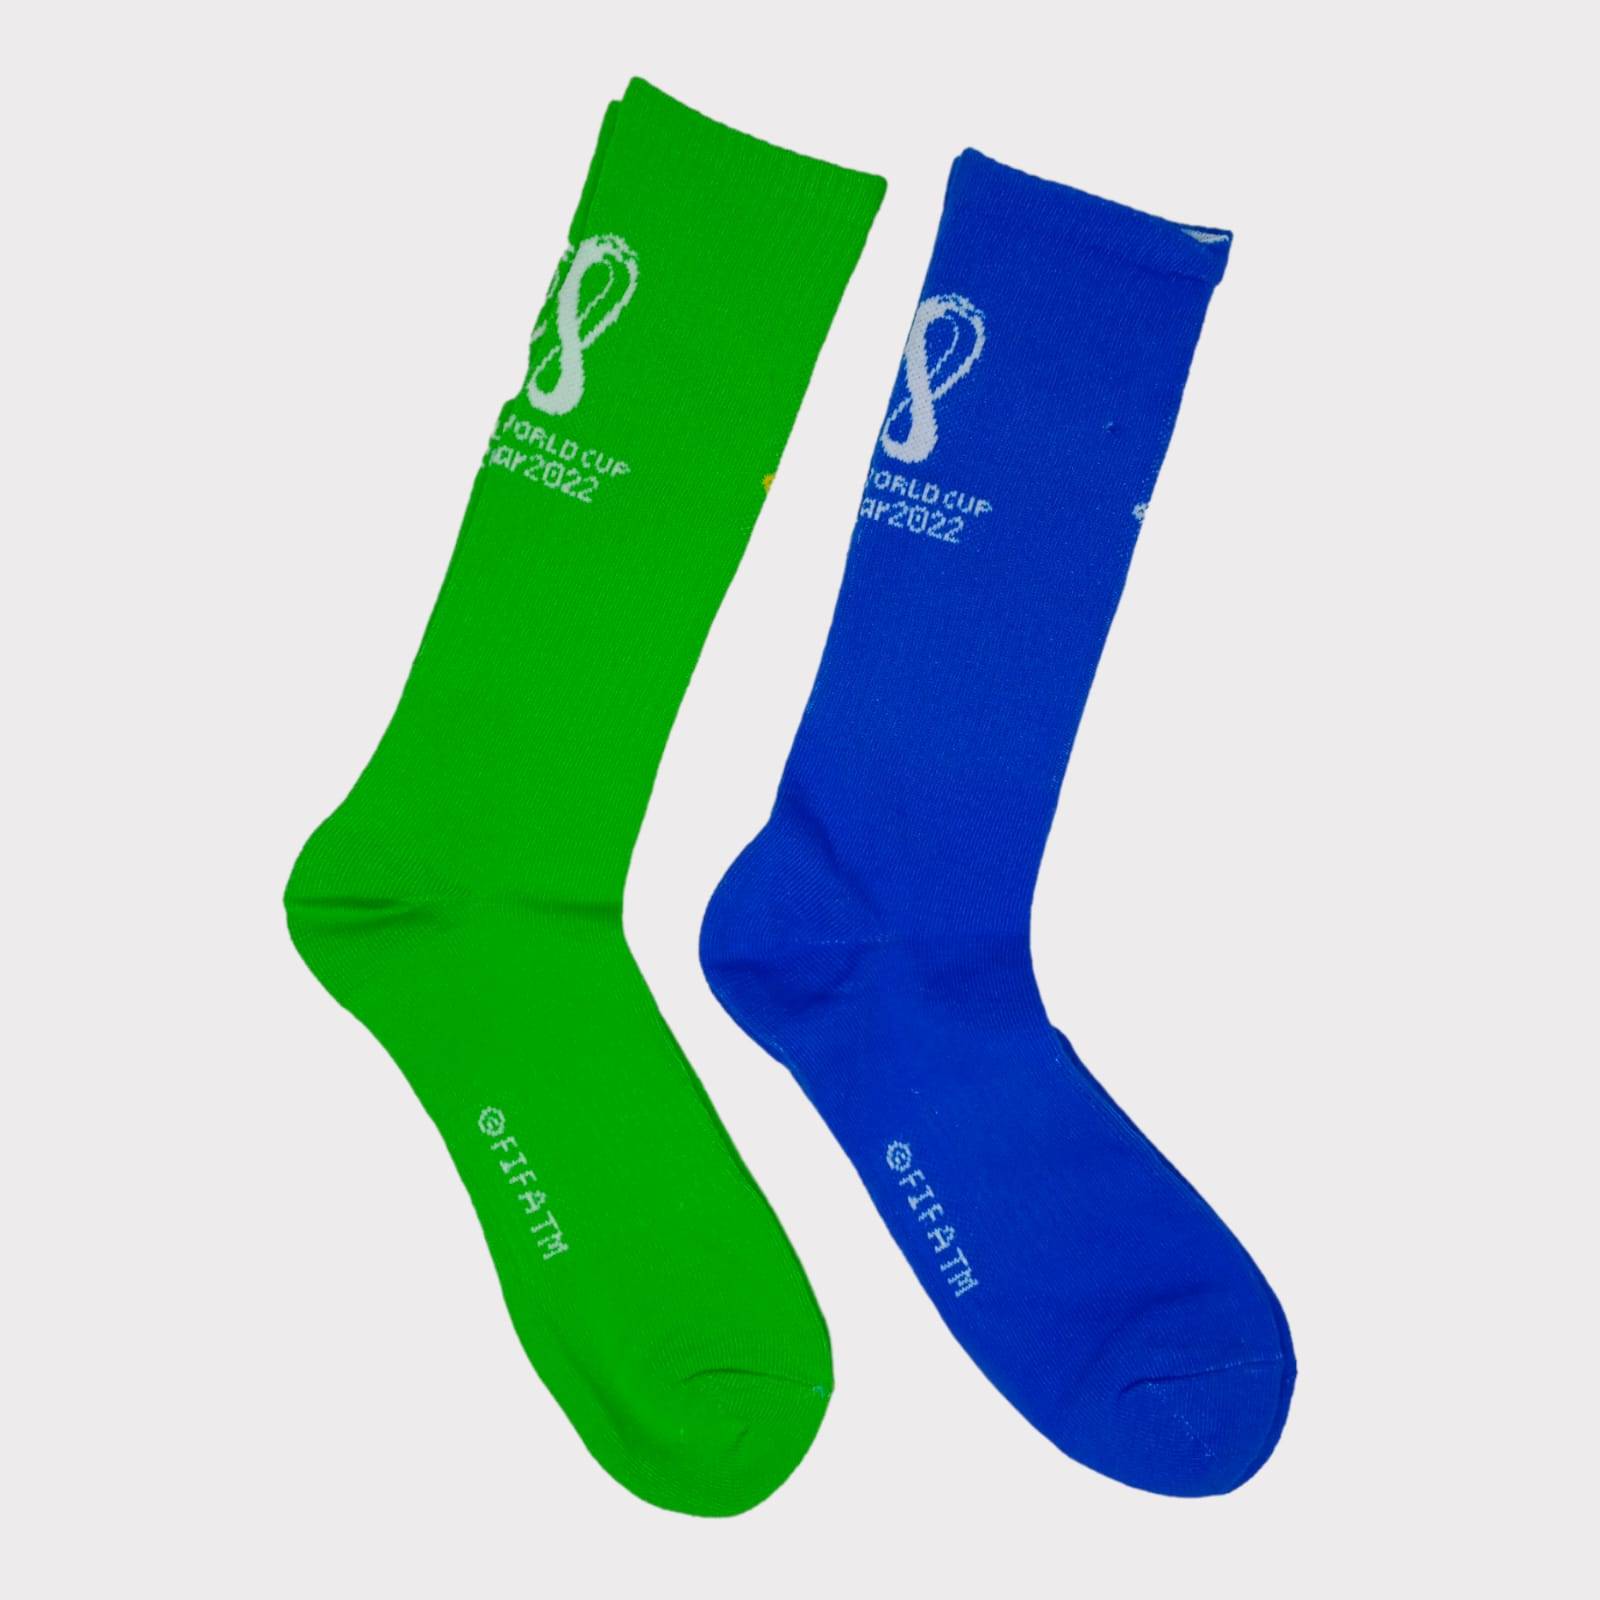 FIFA Brazil Men's Socks: Show your love for Brazil in green & blue (mention size if relevant).Cheer on Brazil in style & comfort with these official FIFA socks.